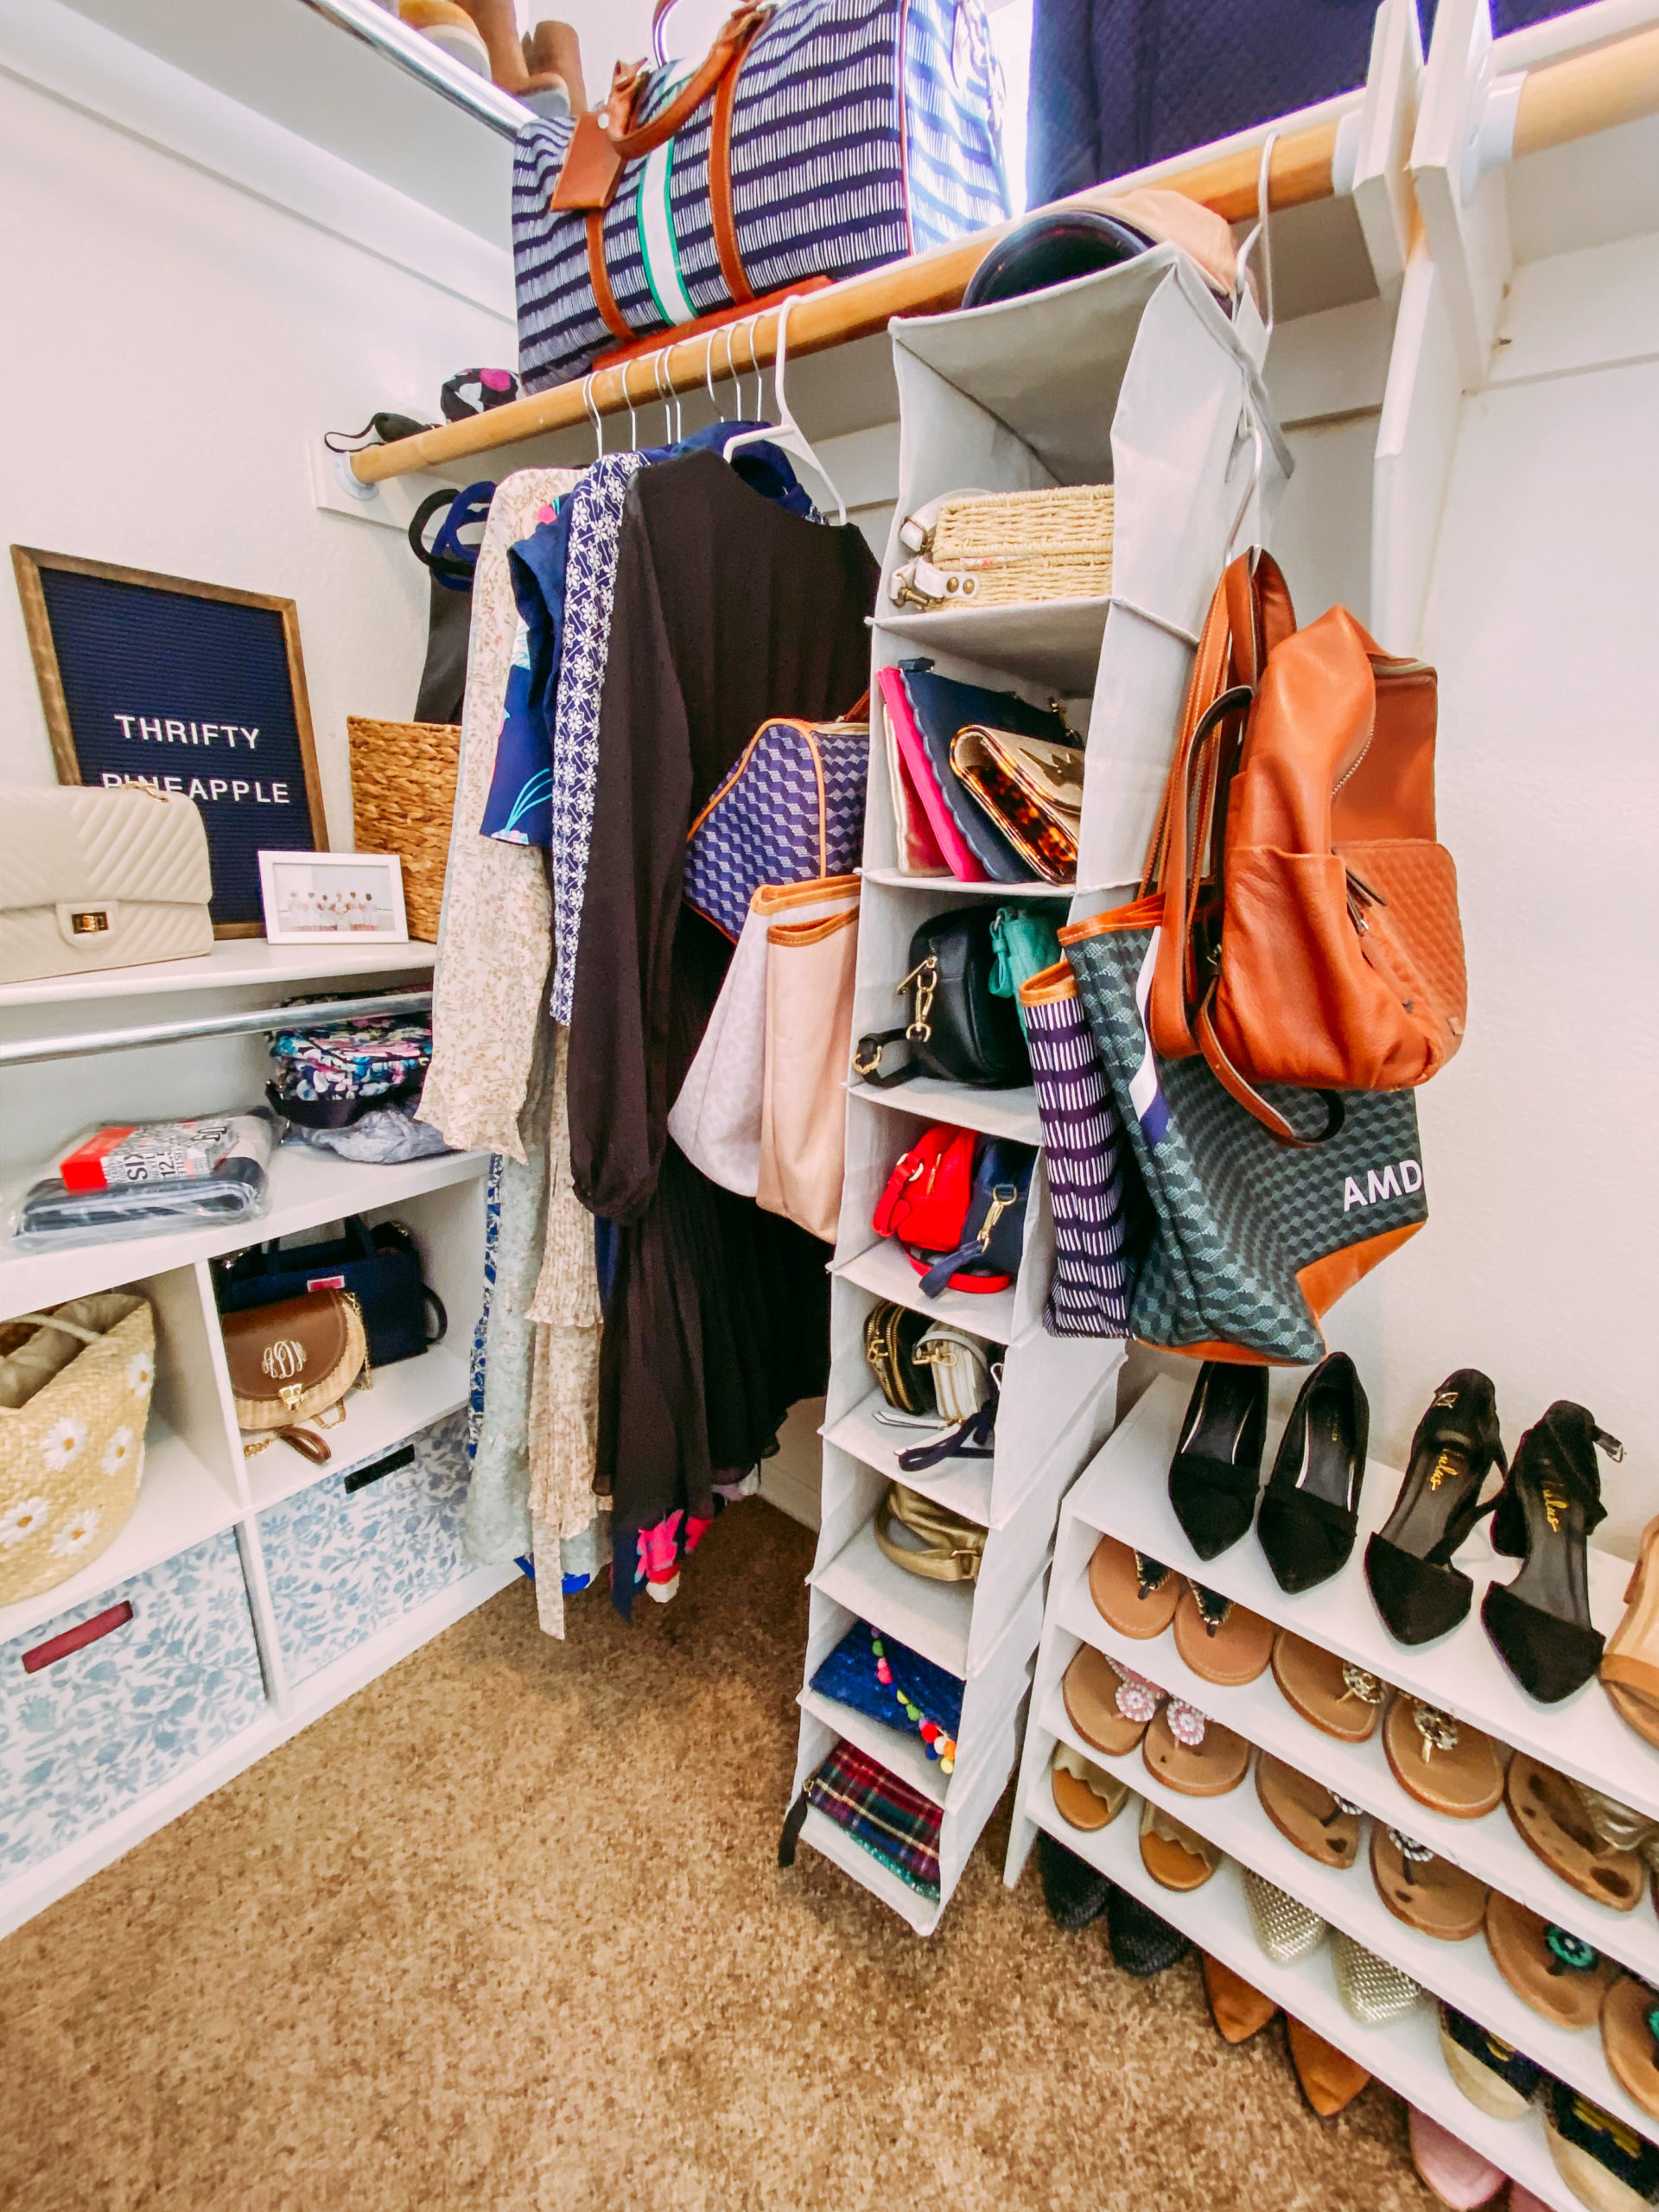 Organize Small Spaces - Our Thrifty Ideas